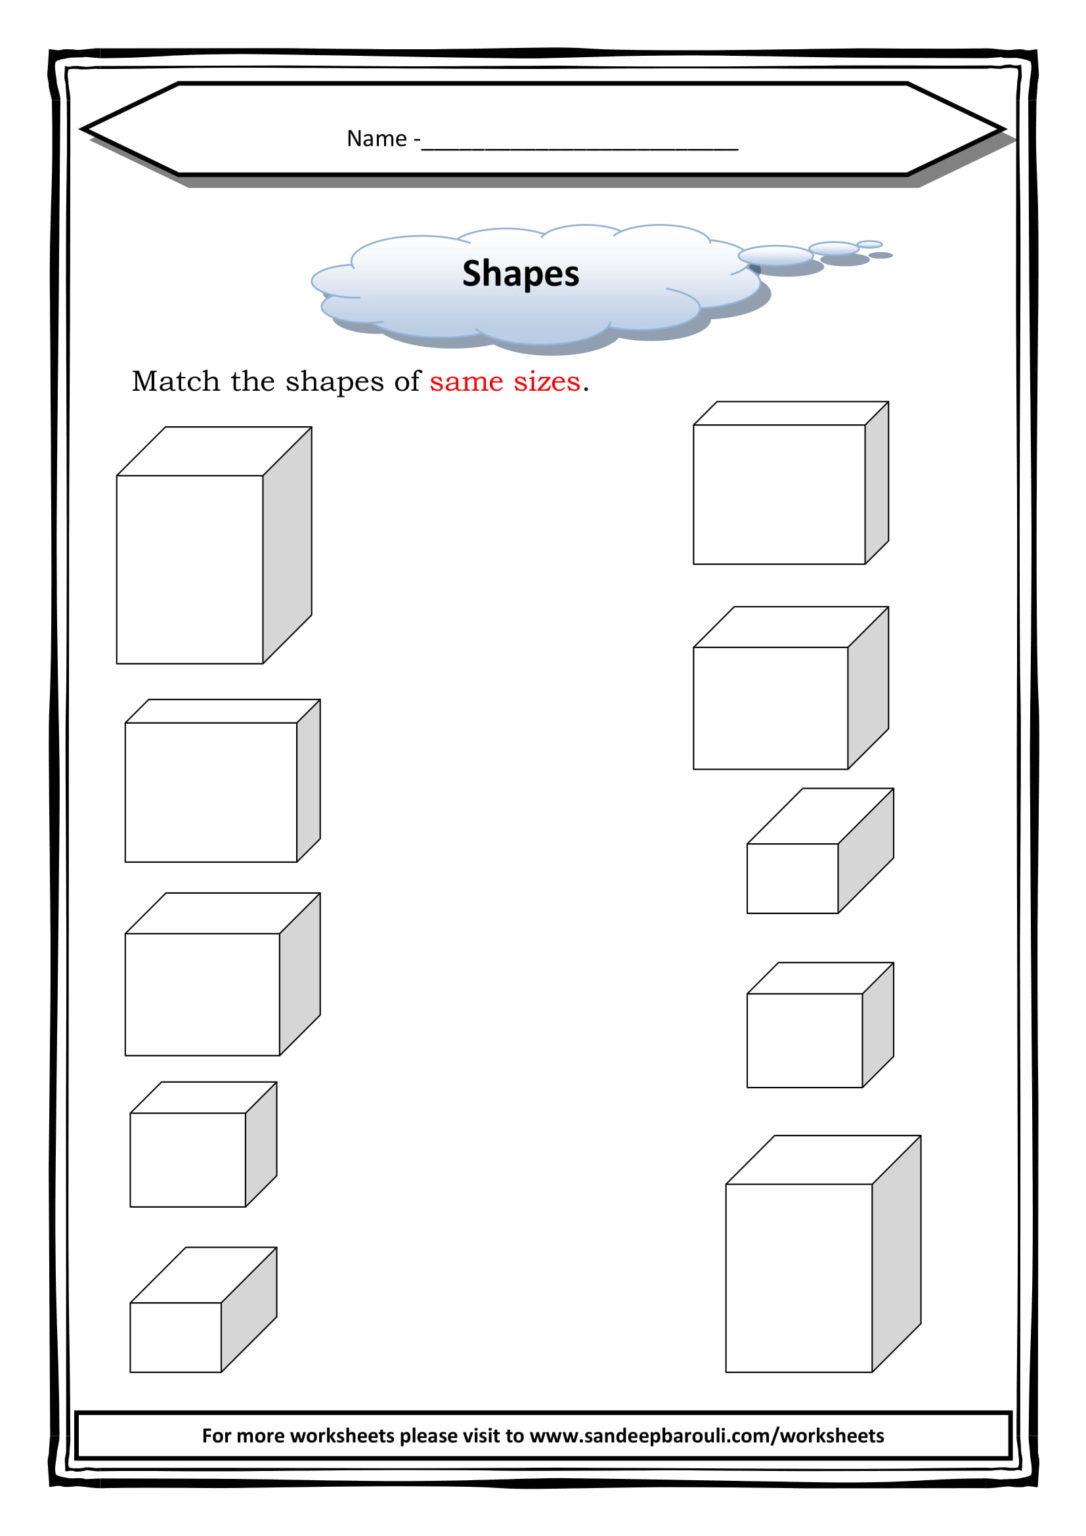 Match The Shapes Of Same Sizes Worksheet For Class 1 SandeepBarouli Com